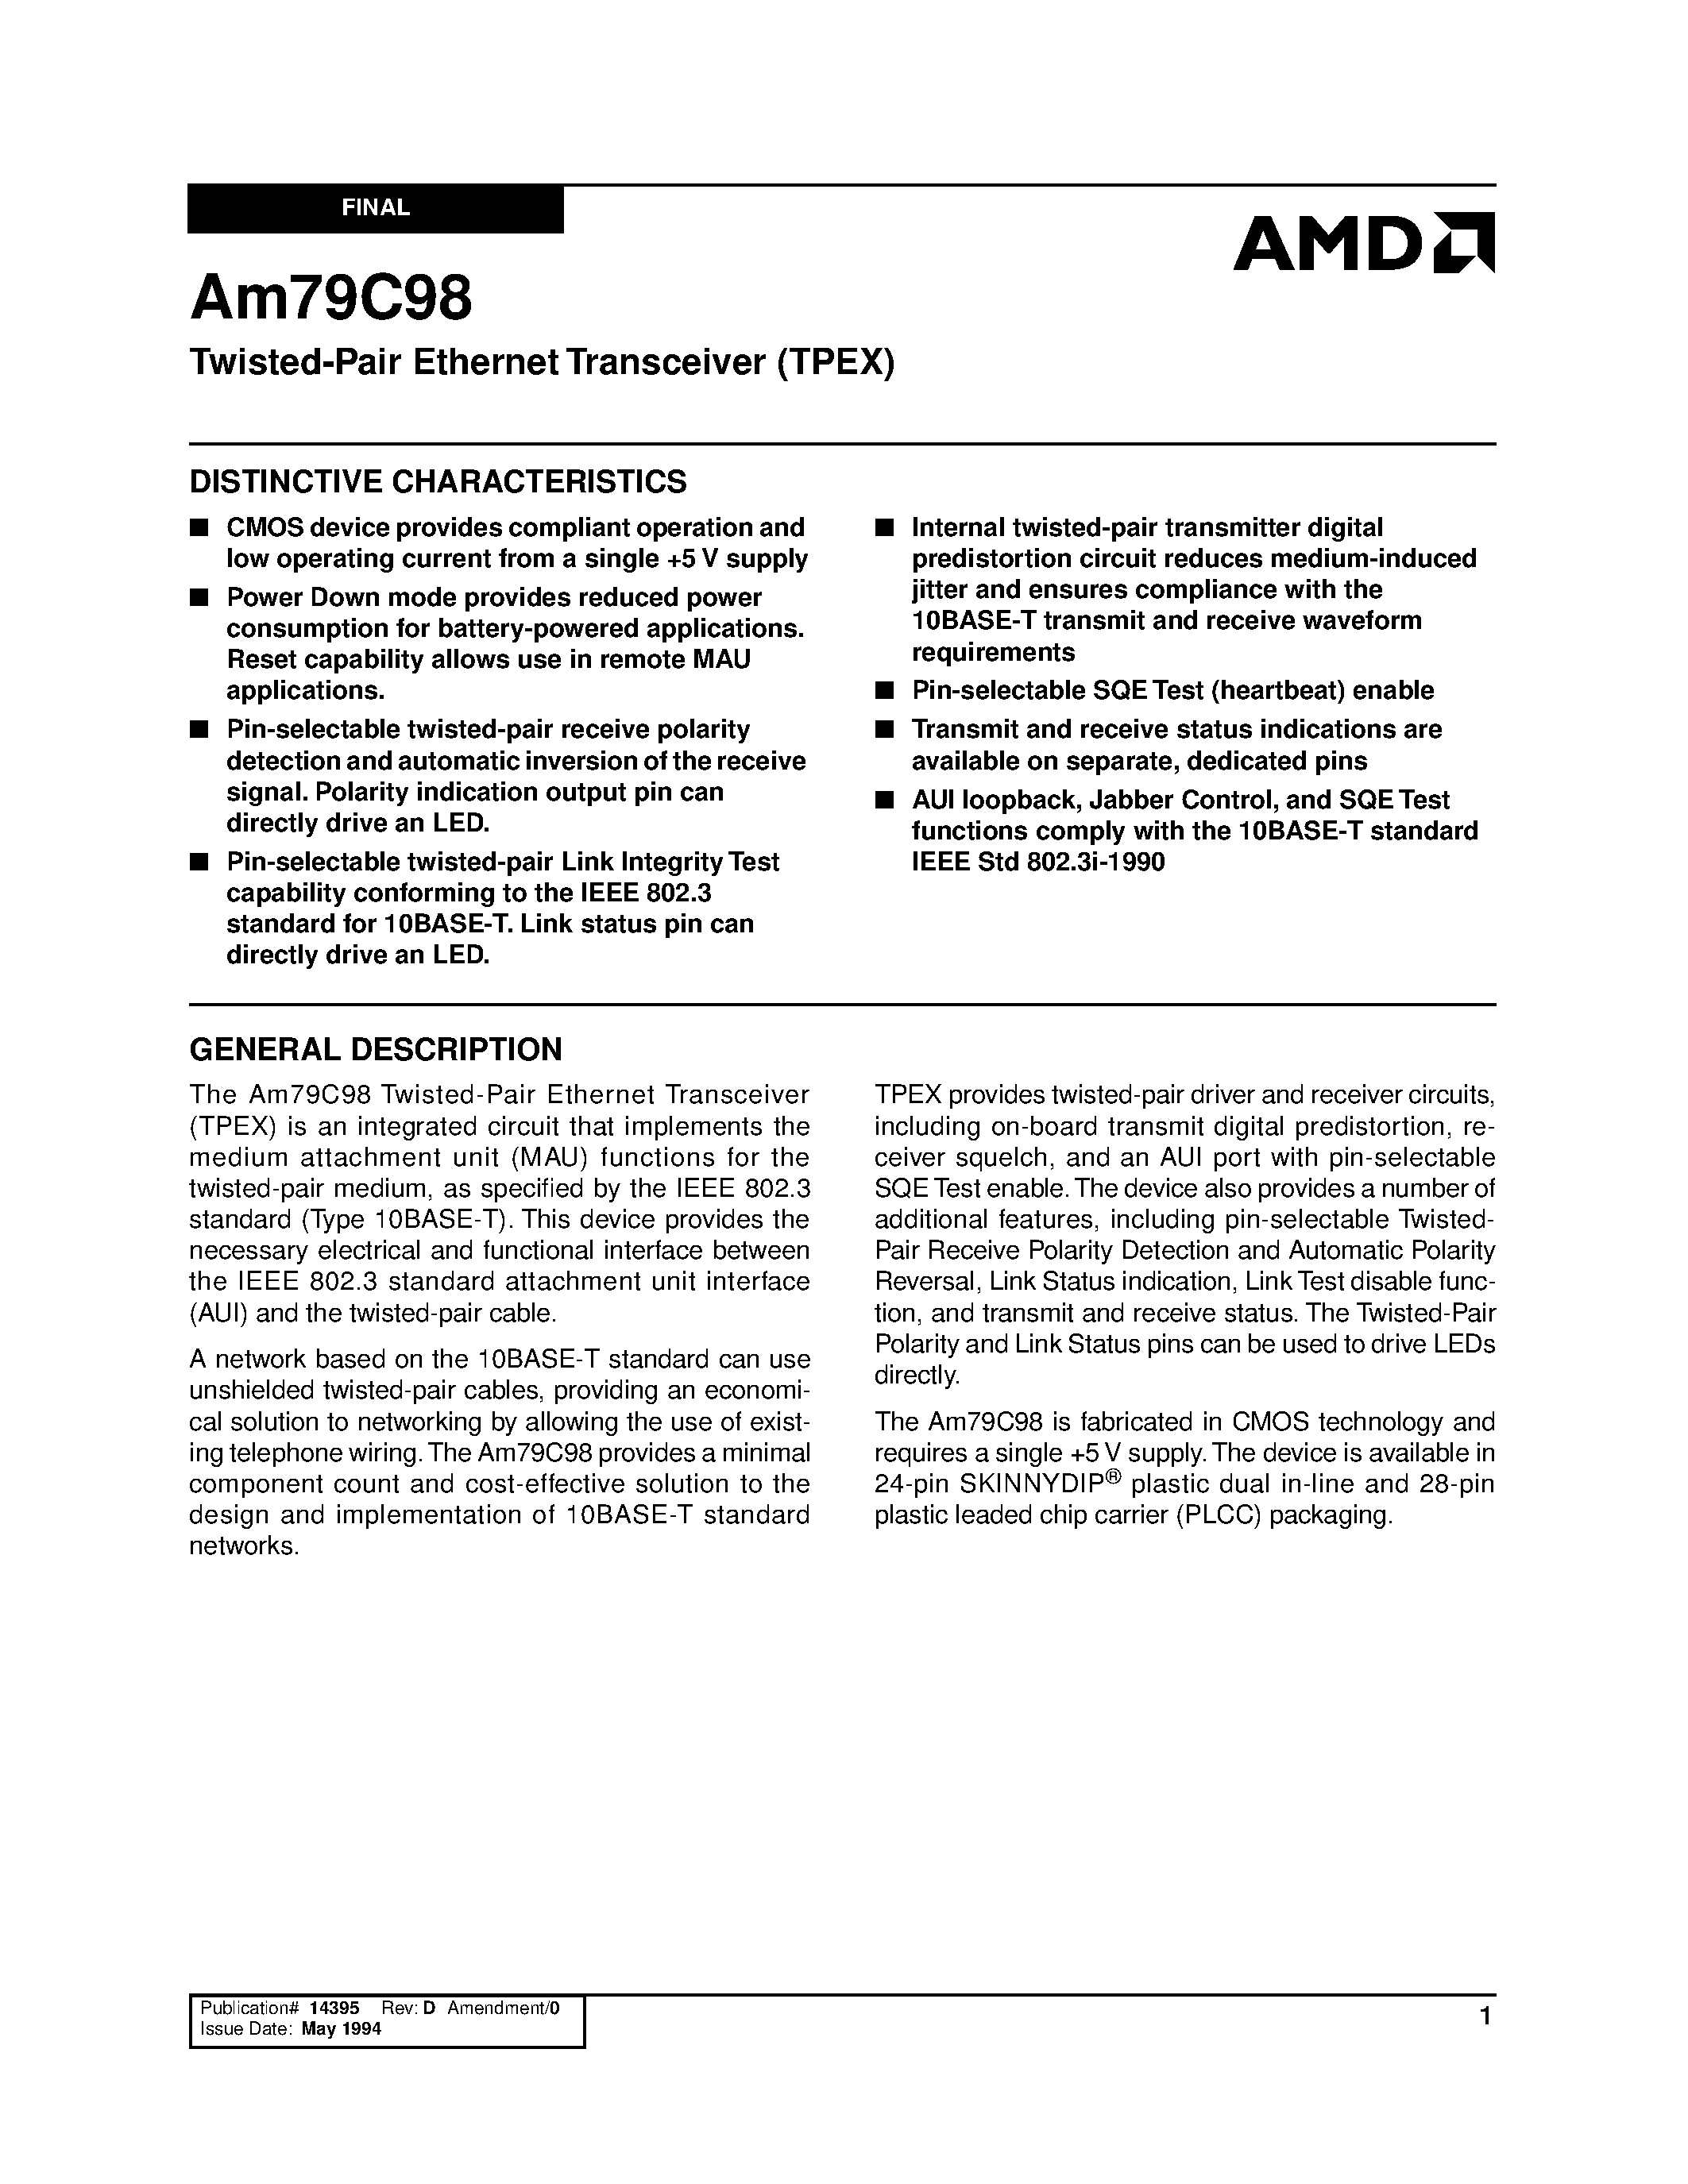 Datasheet AM79C98PC - Twisted-Pair Ethernet Transceiver (TPEX) page 1